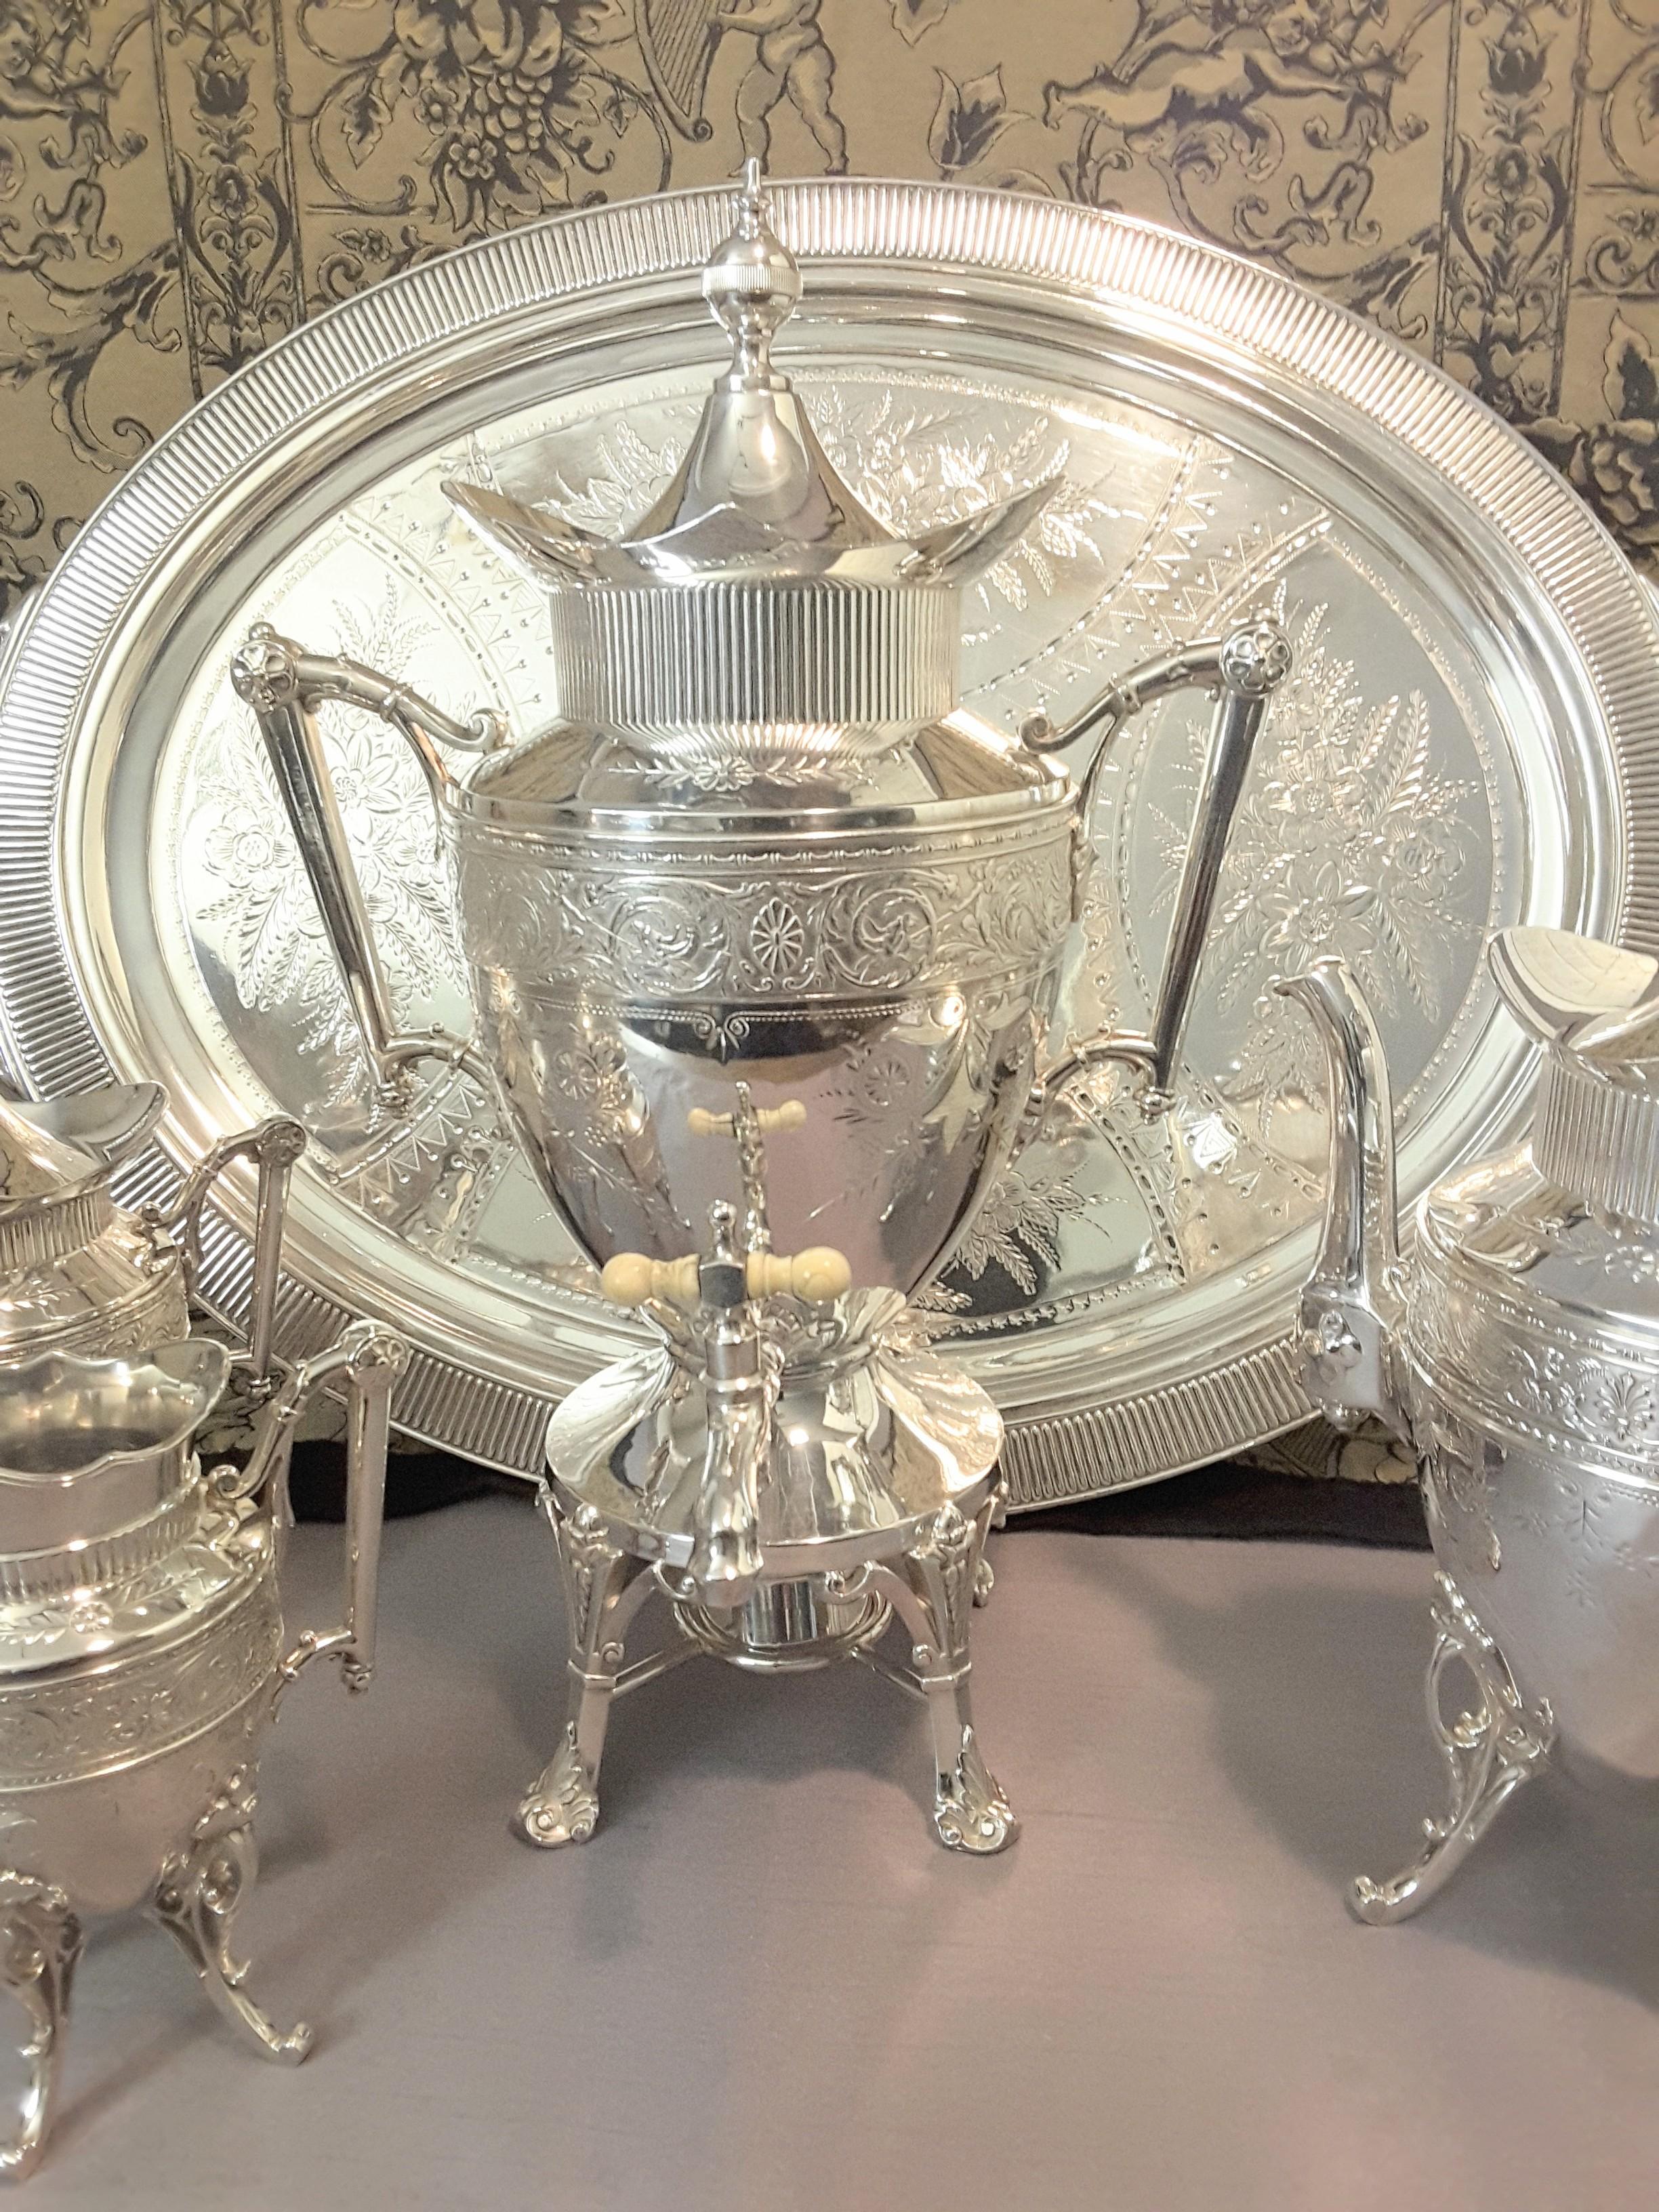 Exquisite Aesthetic Movement Silverplated Tea Service by Simpson, Hall & Miller Co. circa 1870-1890, large scale set consisting of a hot water kettle on stand with under burner, tea pot, covered sugar and creamer with a very large tray measuring 31